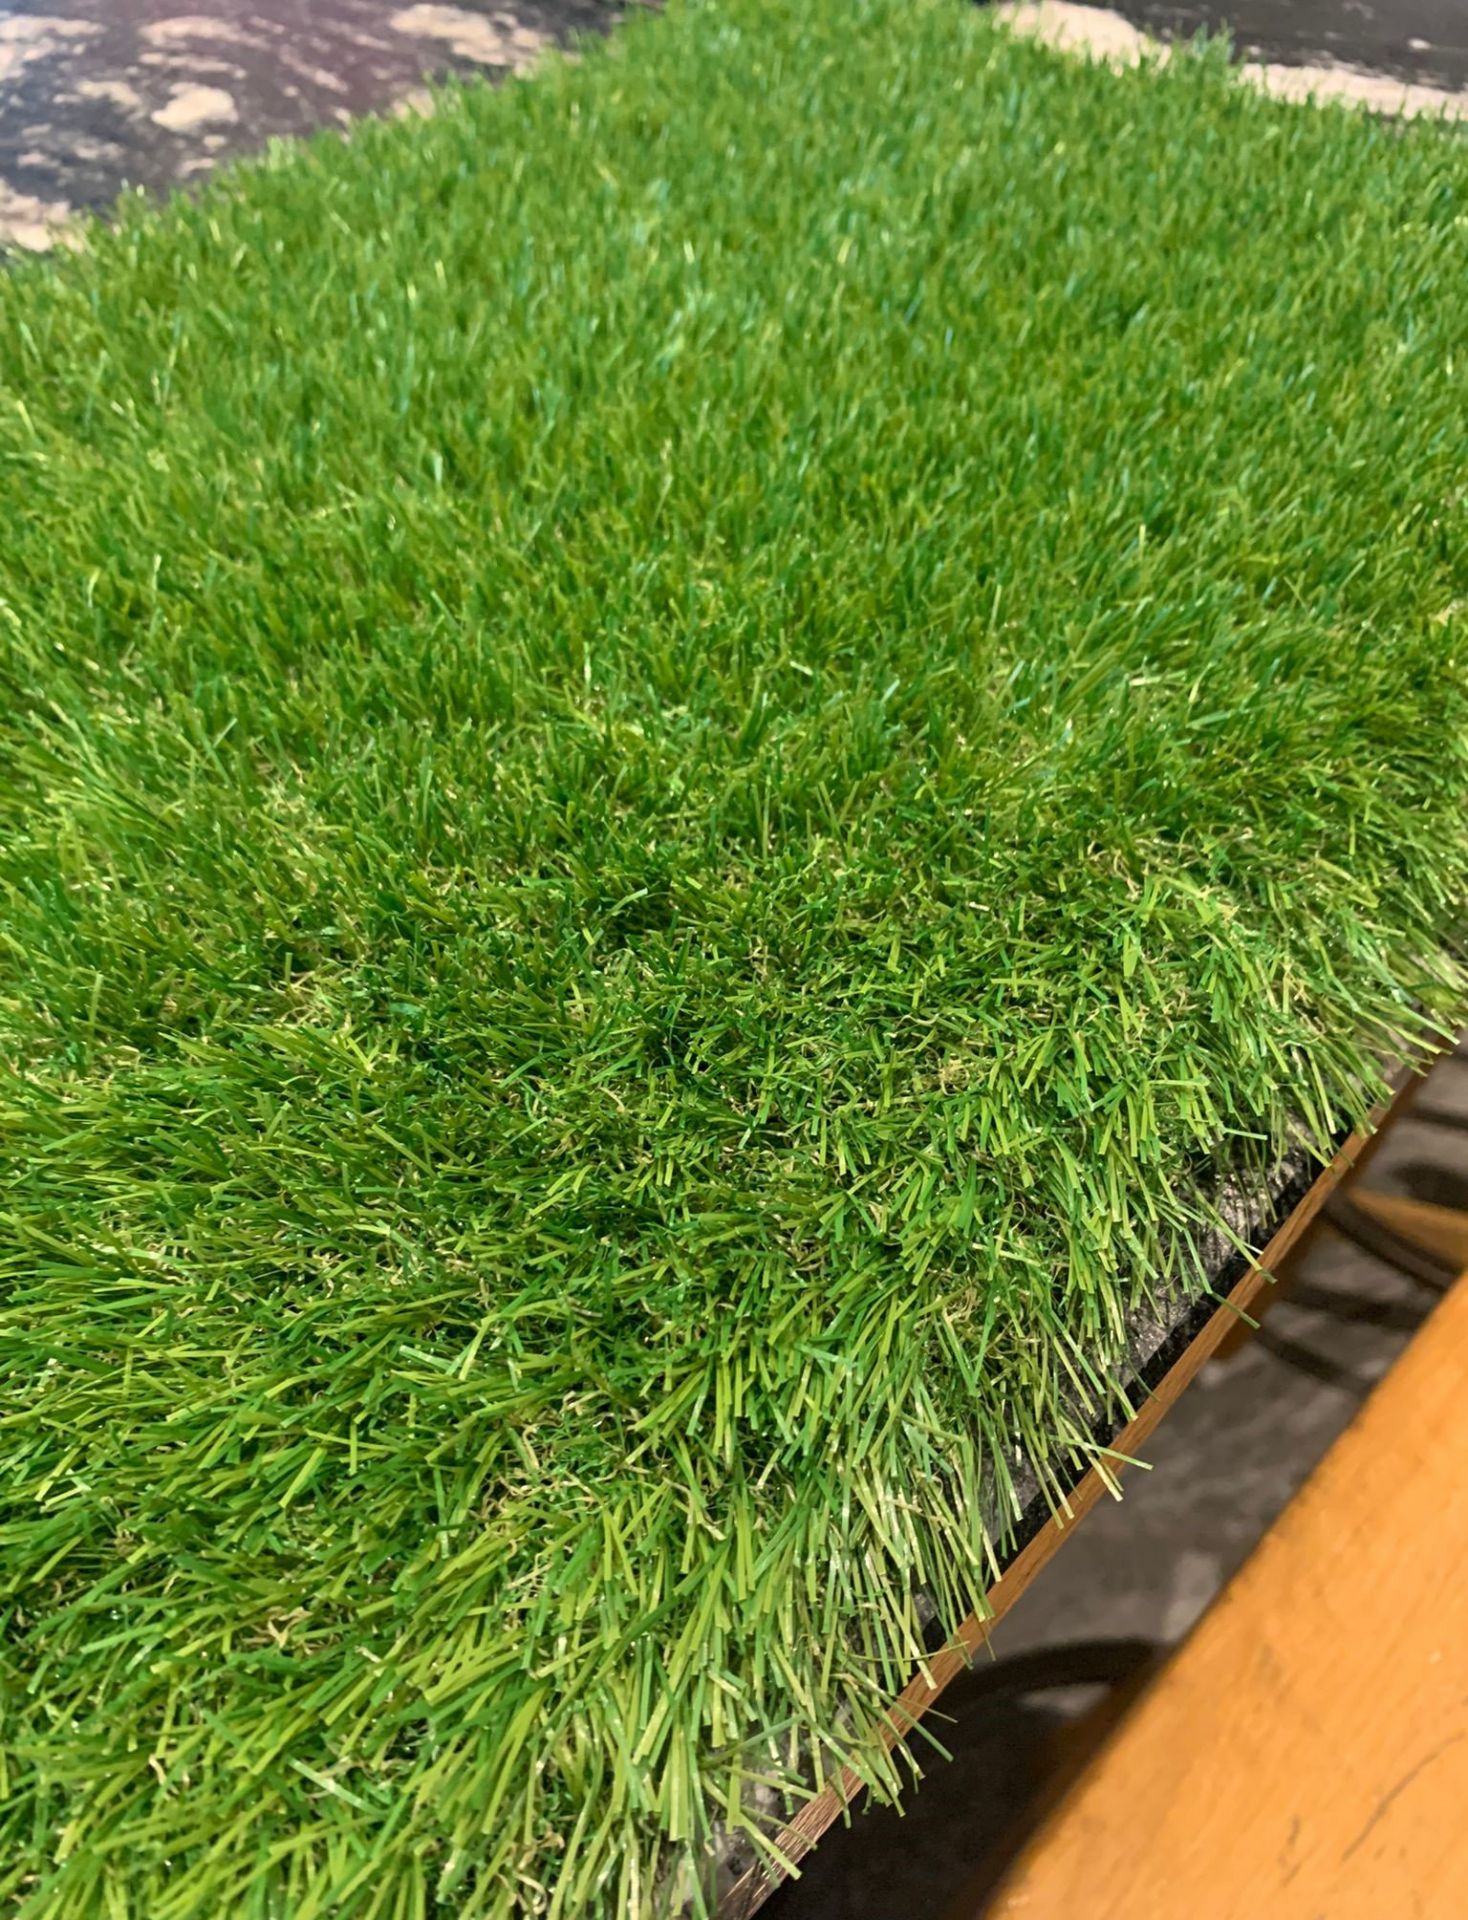 1 x Playrite Nearly Grass - Artificial Grass/Turf - 30X4 Meter Roll - Ref: NWF022 - CL912 - NO VAT - Image 4 of 6